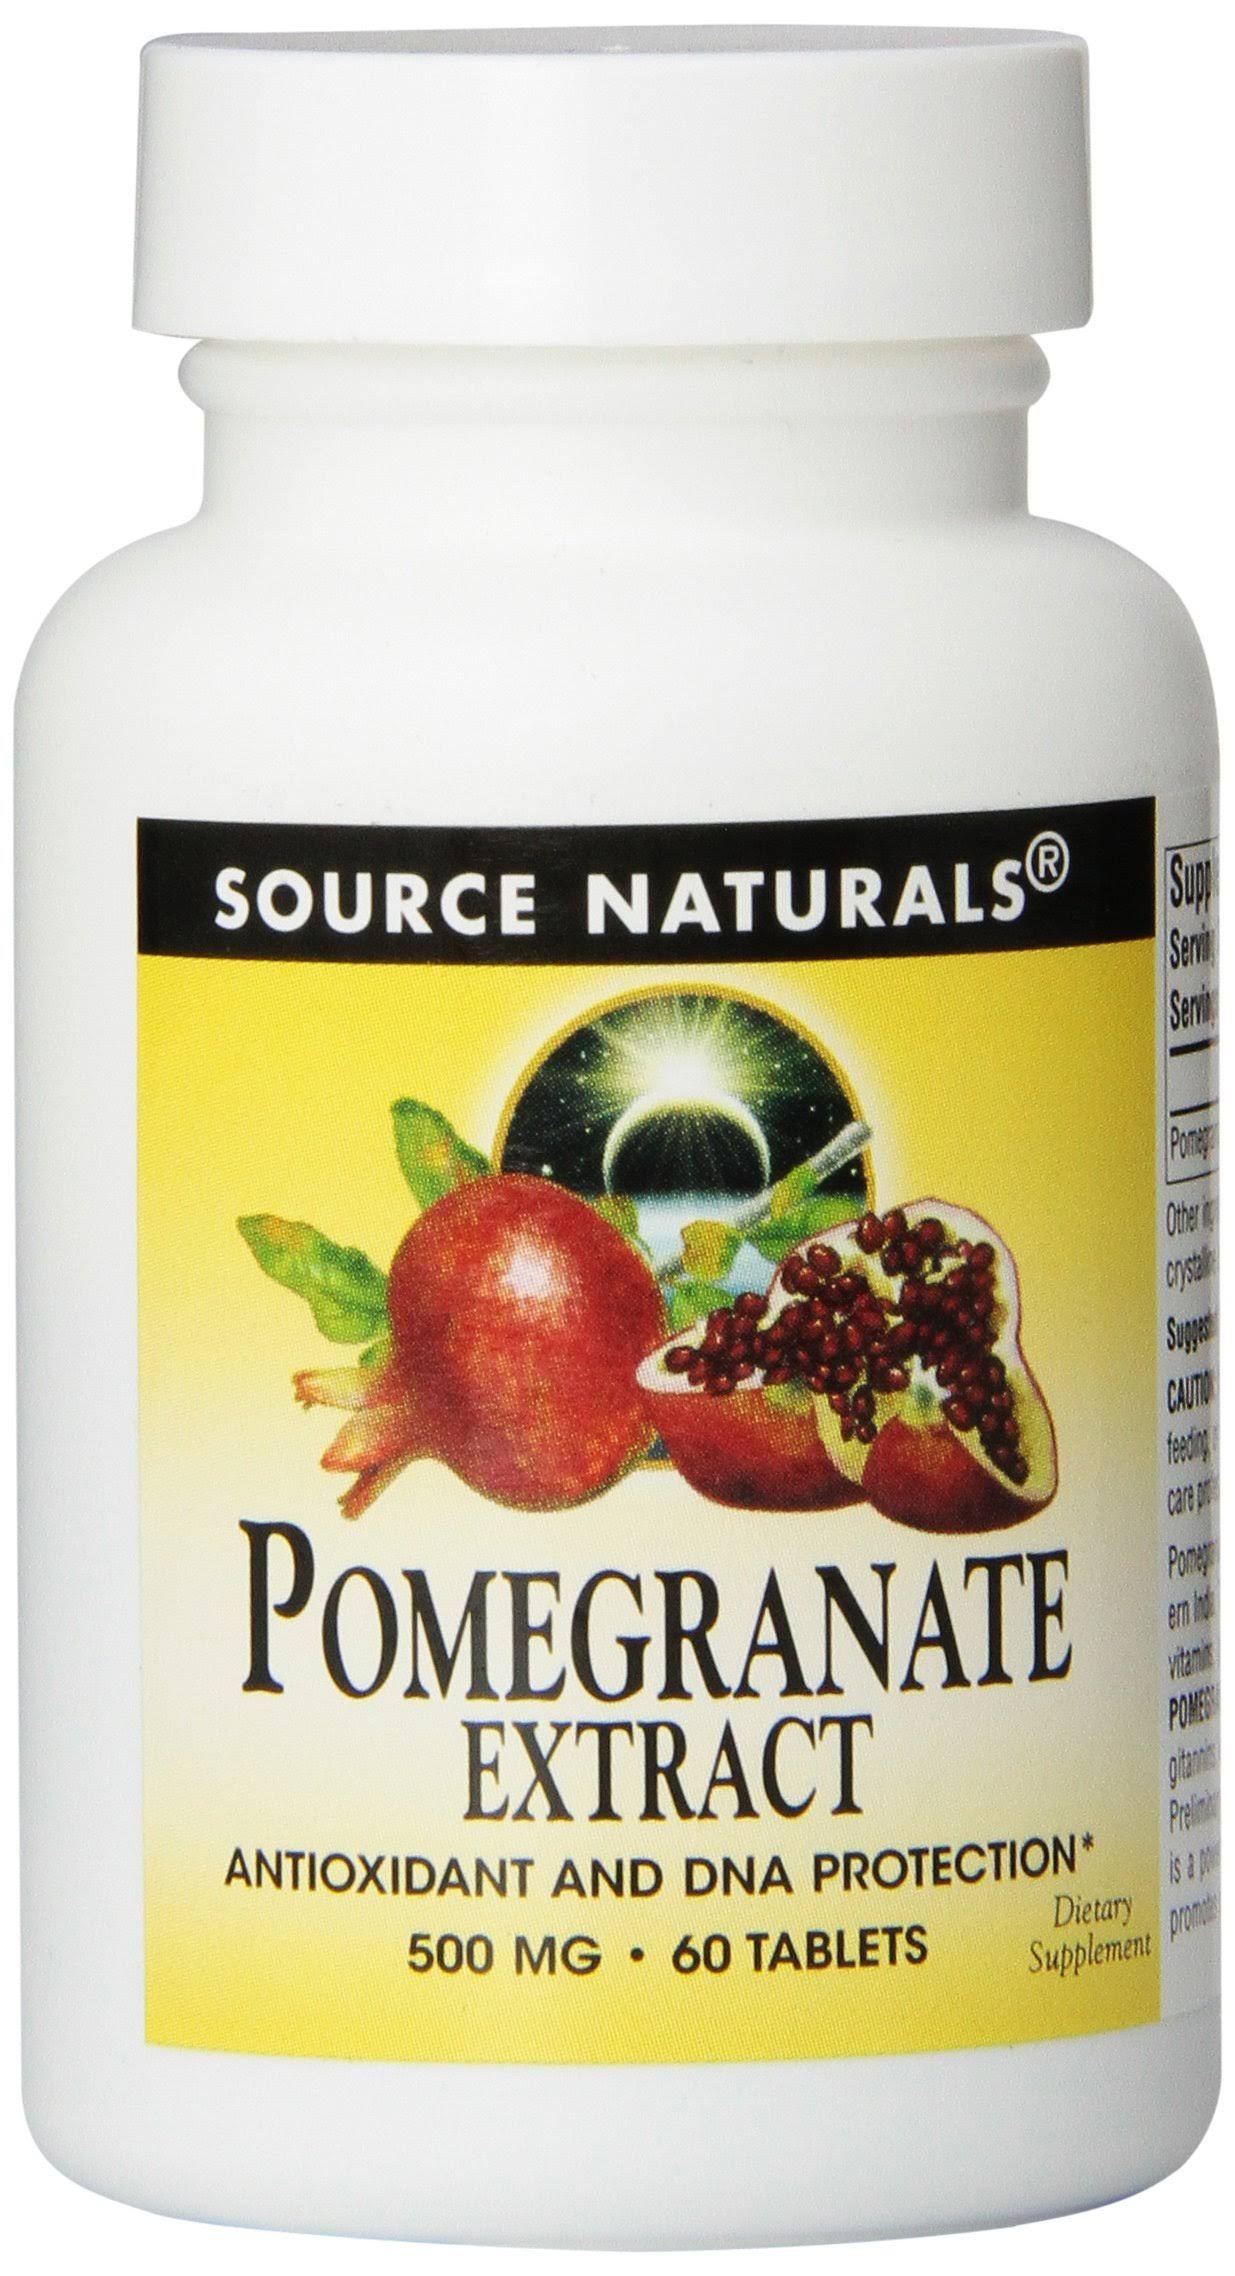 Source Naturals - Pomegranate Extract 500 mg - 60 Tablets